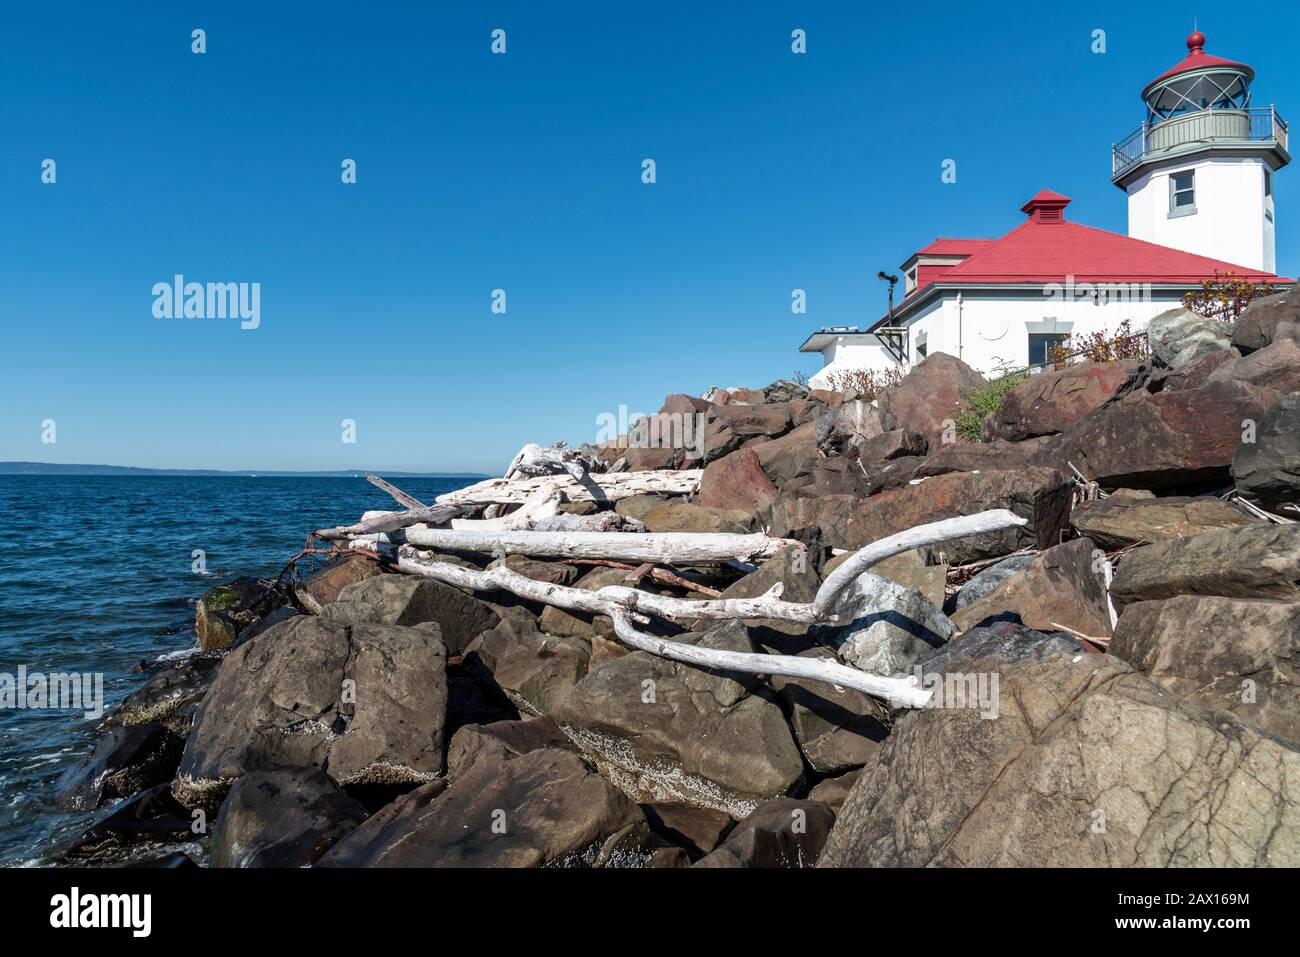 Sun bleached driftwood resting on reinforced rock sea wall under the Alki Point Lighthouse in West Seattle, Washington, mid day blue sky. Stock Photo